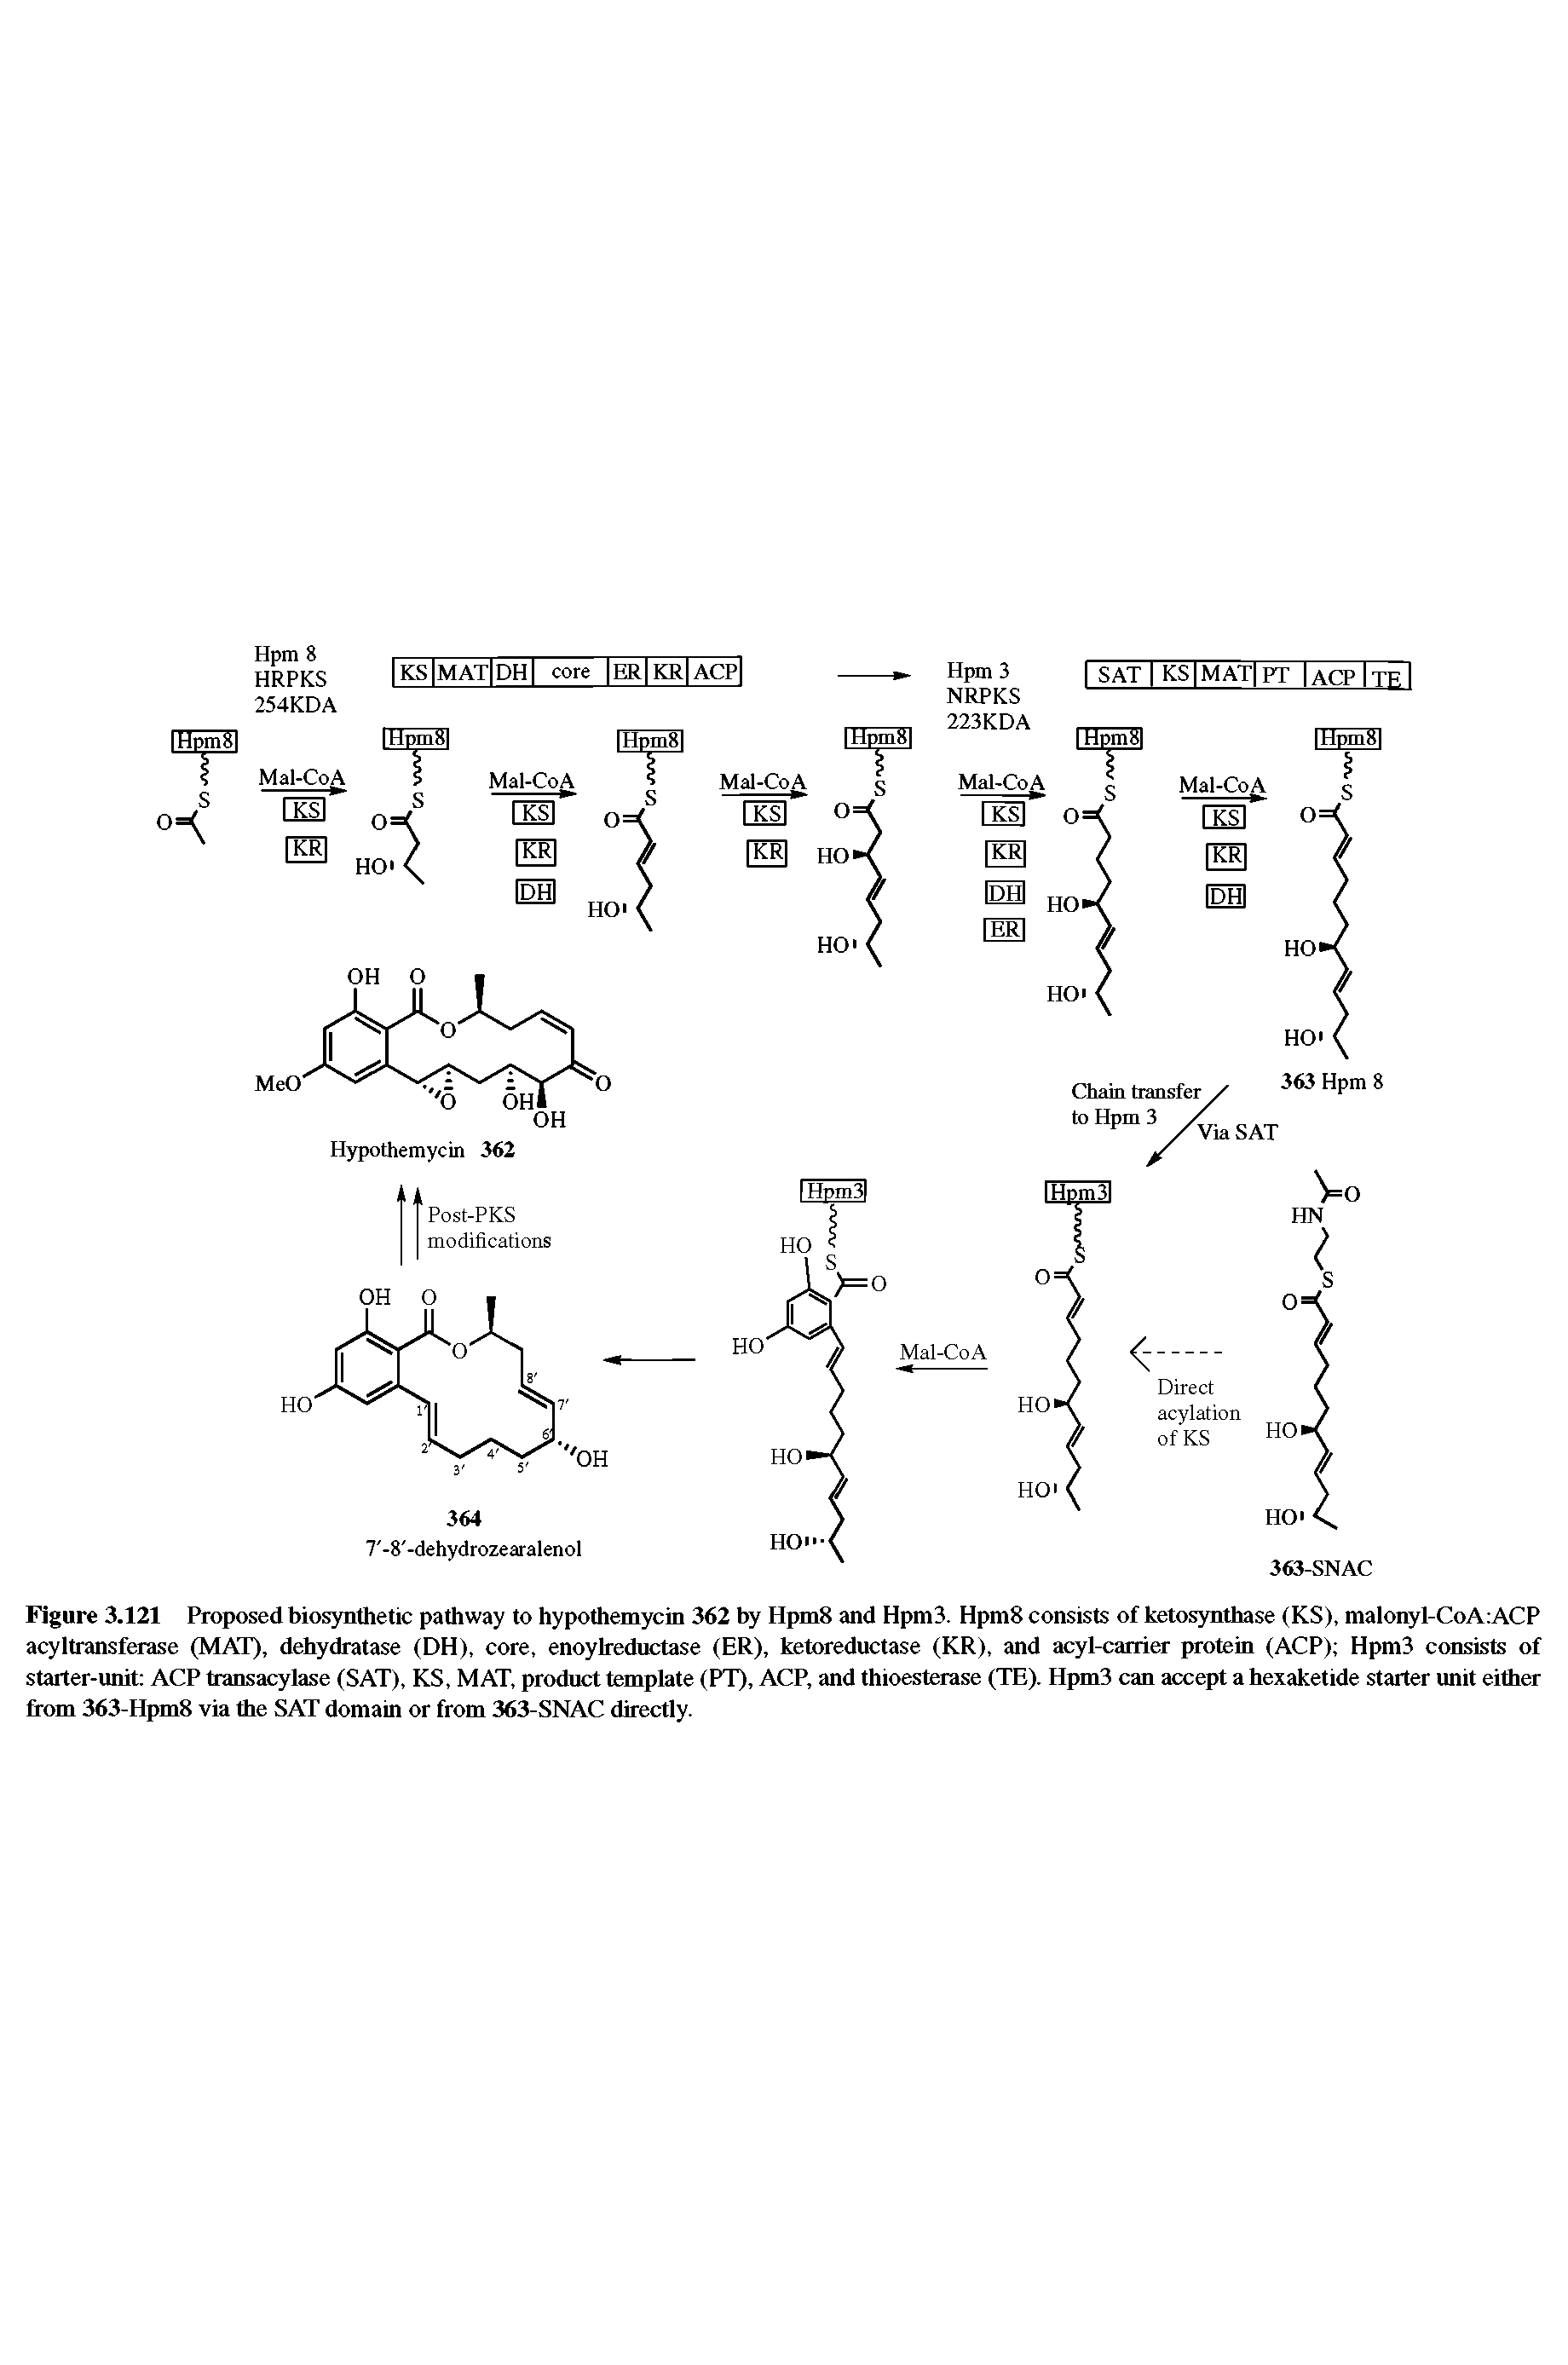 Figure 3.121 Proposed biosynthetic pathway to hypothemycin 362 by Hpm8 and Hpm3. Hpm8 consists of ketosynthase (KS), malonyl-CoA ACP acyltransferase (MAT), dehydratase (DH), core, enoylreductase (ER), ketoreductase (KR), and acyl-carrier protein (ACP) Hpm3 consists of starter-unit ACP transacylase (SAT), KS, MAT, product template (PT), ACP, and thioesterase (TE). Hpm3 can accept a hexaketide starter unit either from 363-Hpm8 via the SAT domain or from 363-SNAC directly.